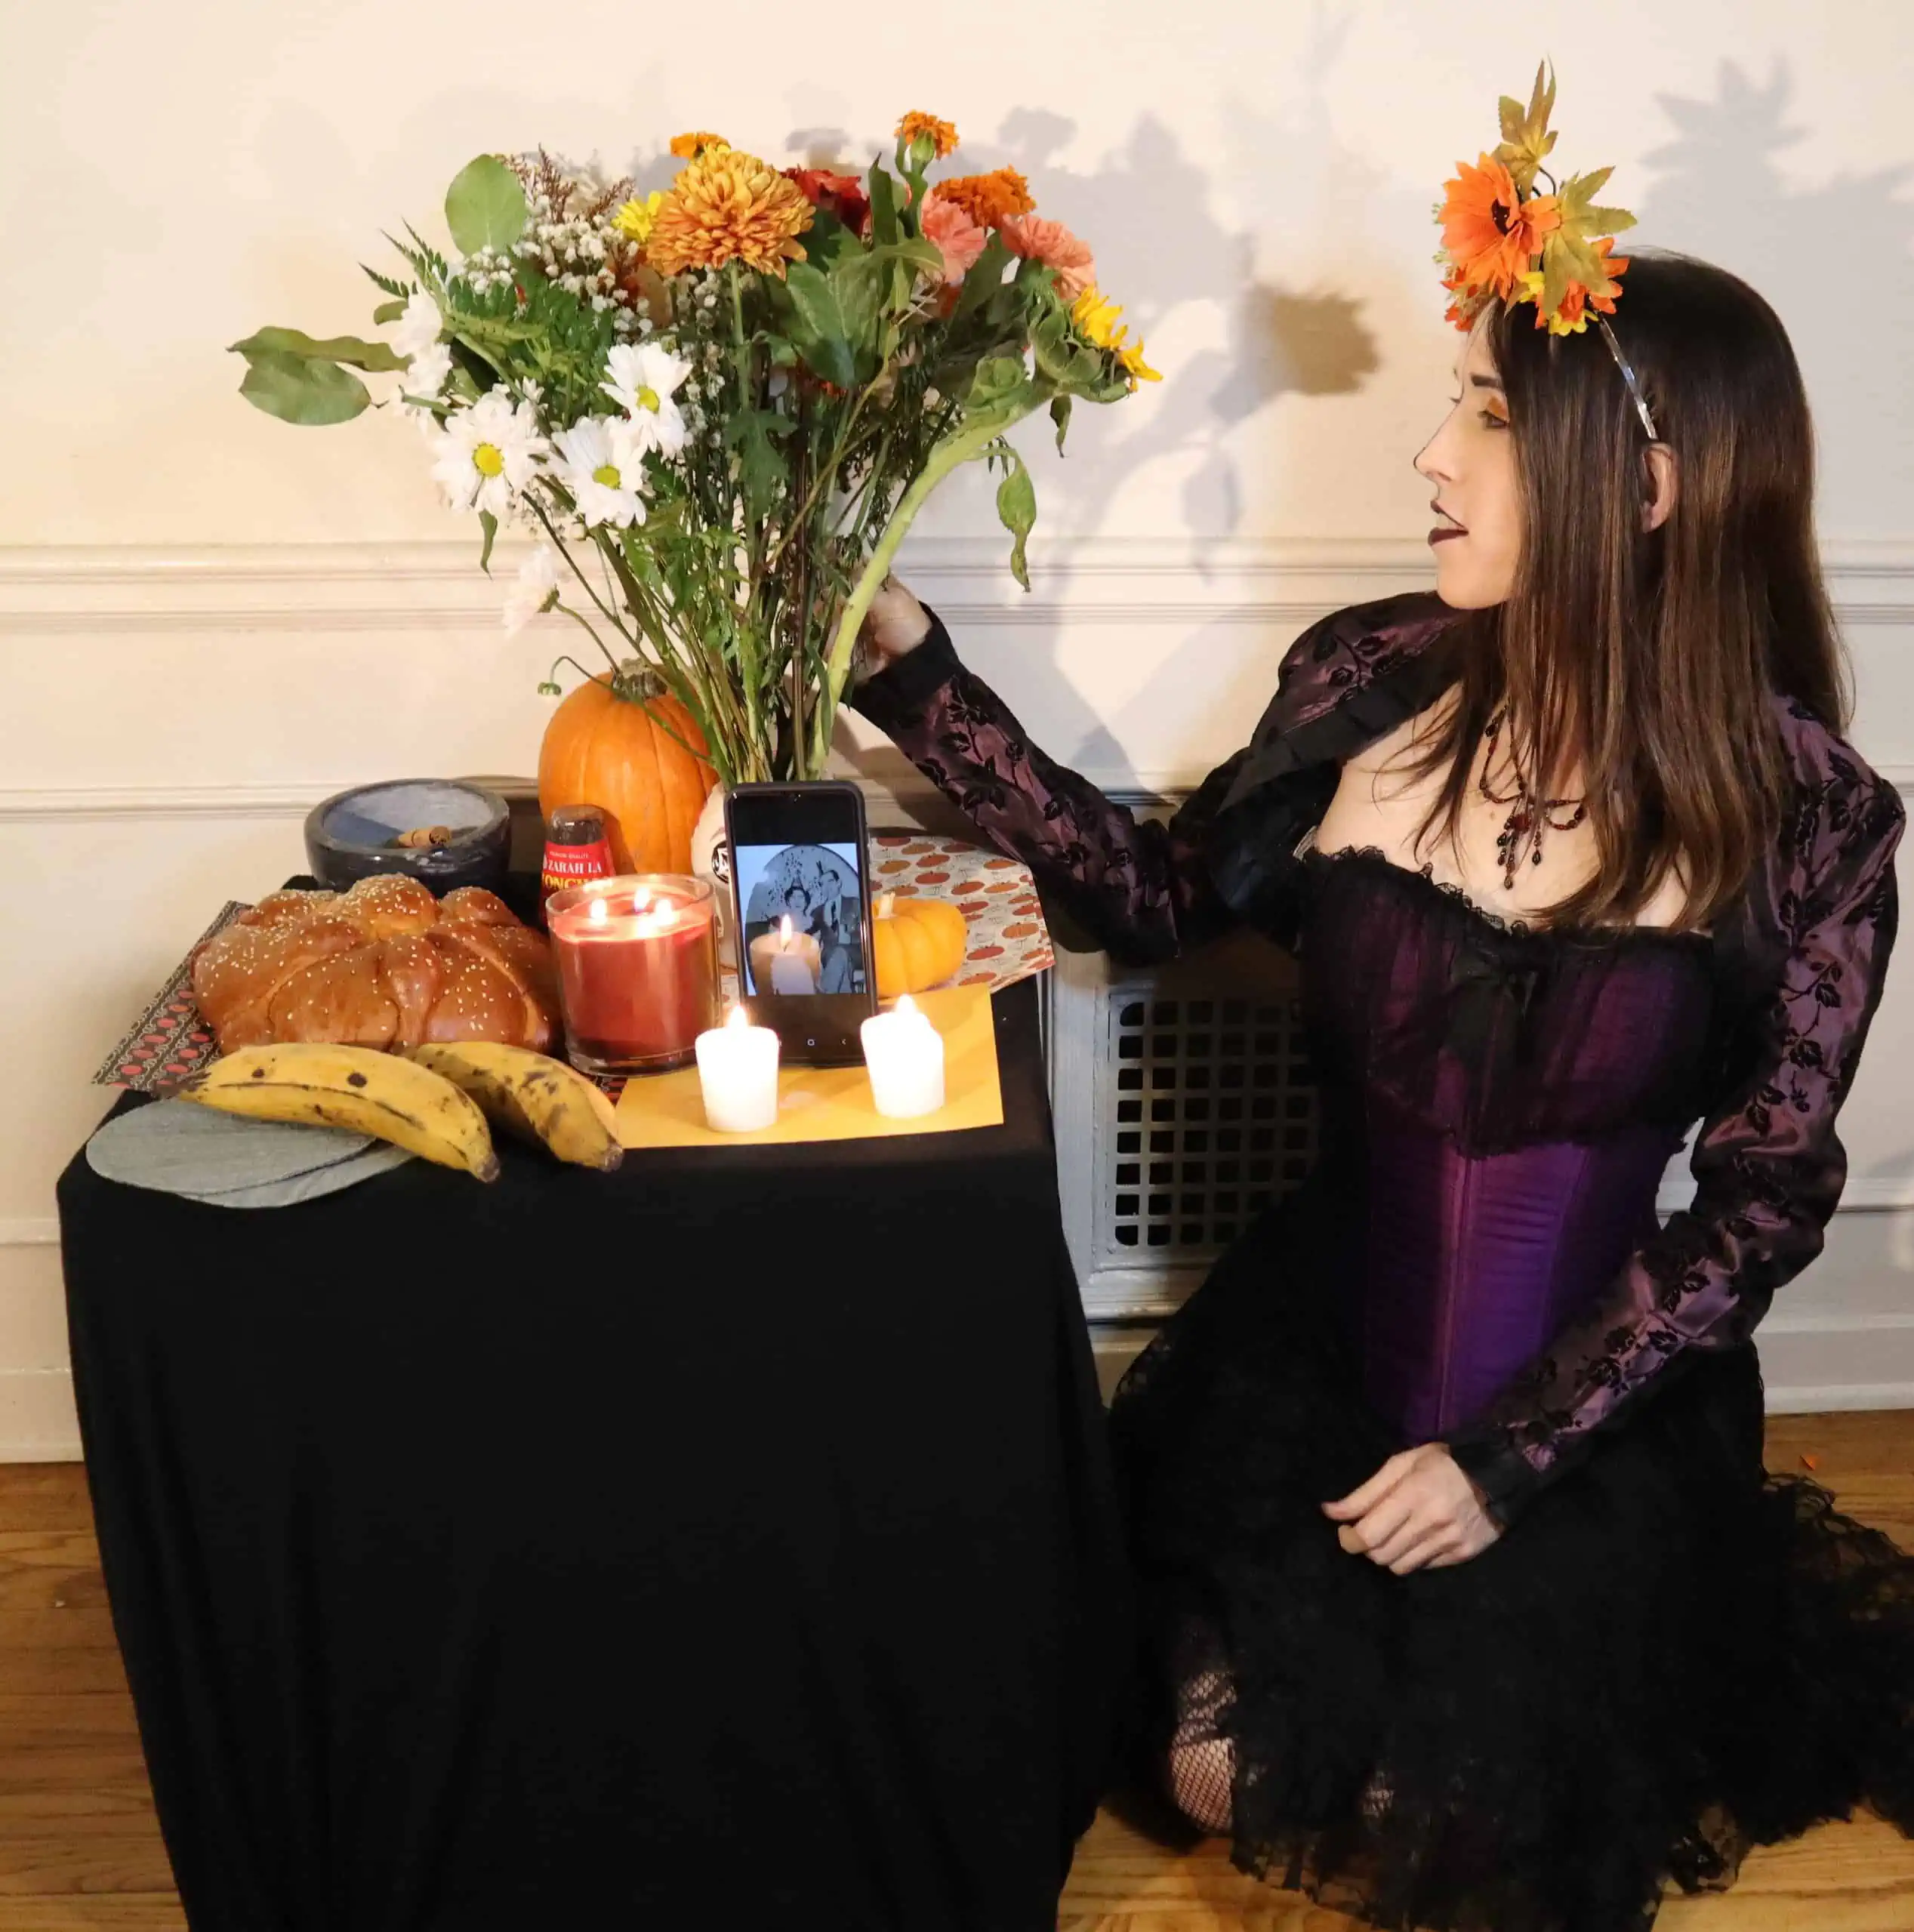 An altar (ofrenda) with flowers, candles, food, and plantains. Kayley Whalen, a Latina trans woman, is wearing a corset and flowers in her hair and kneeling at the altar.